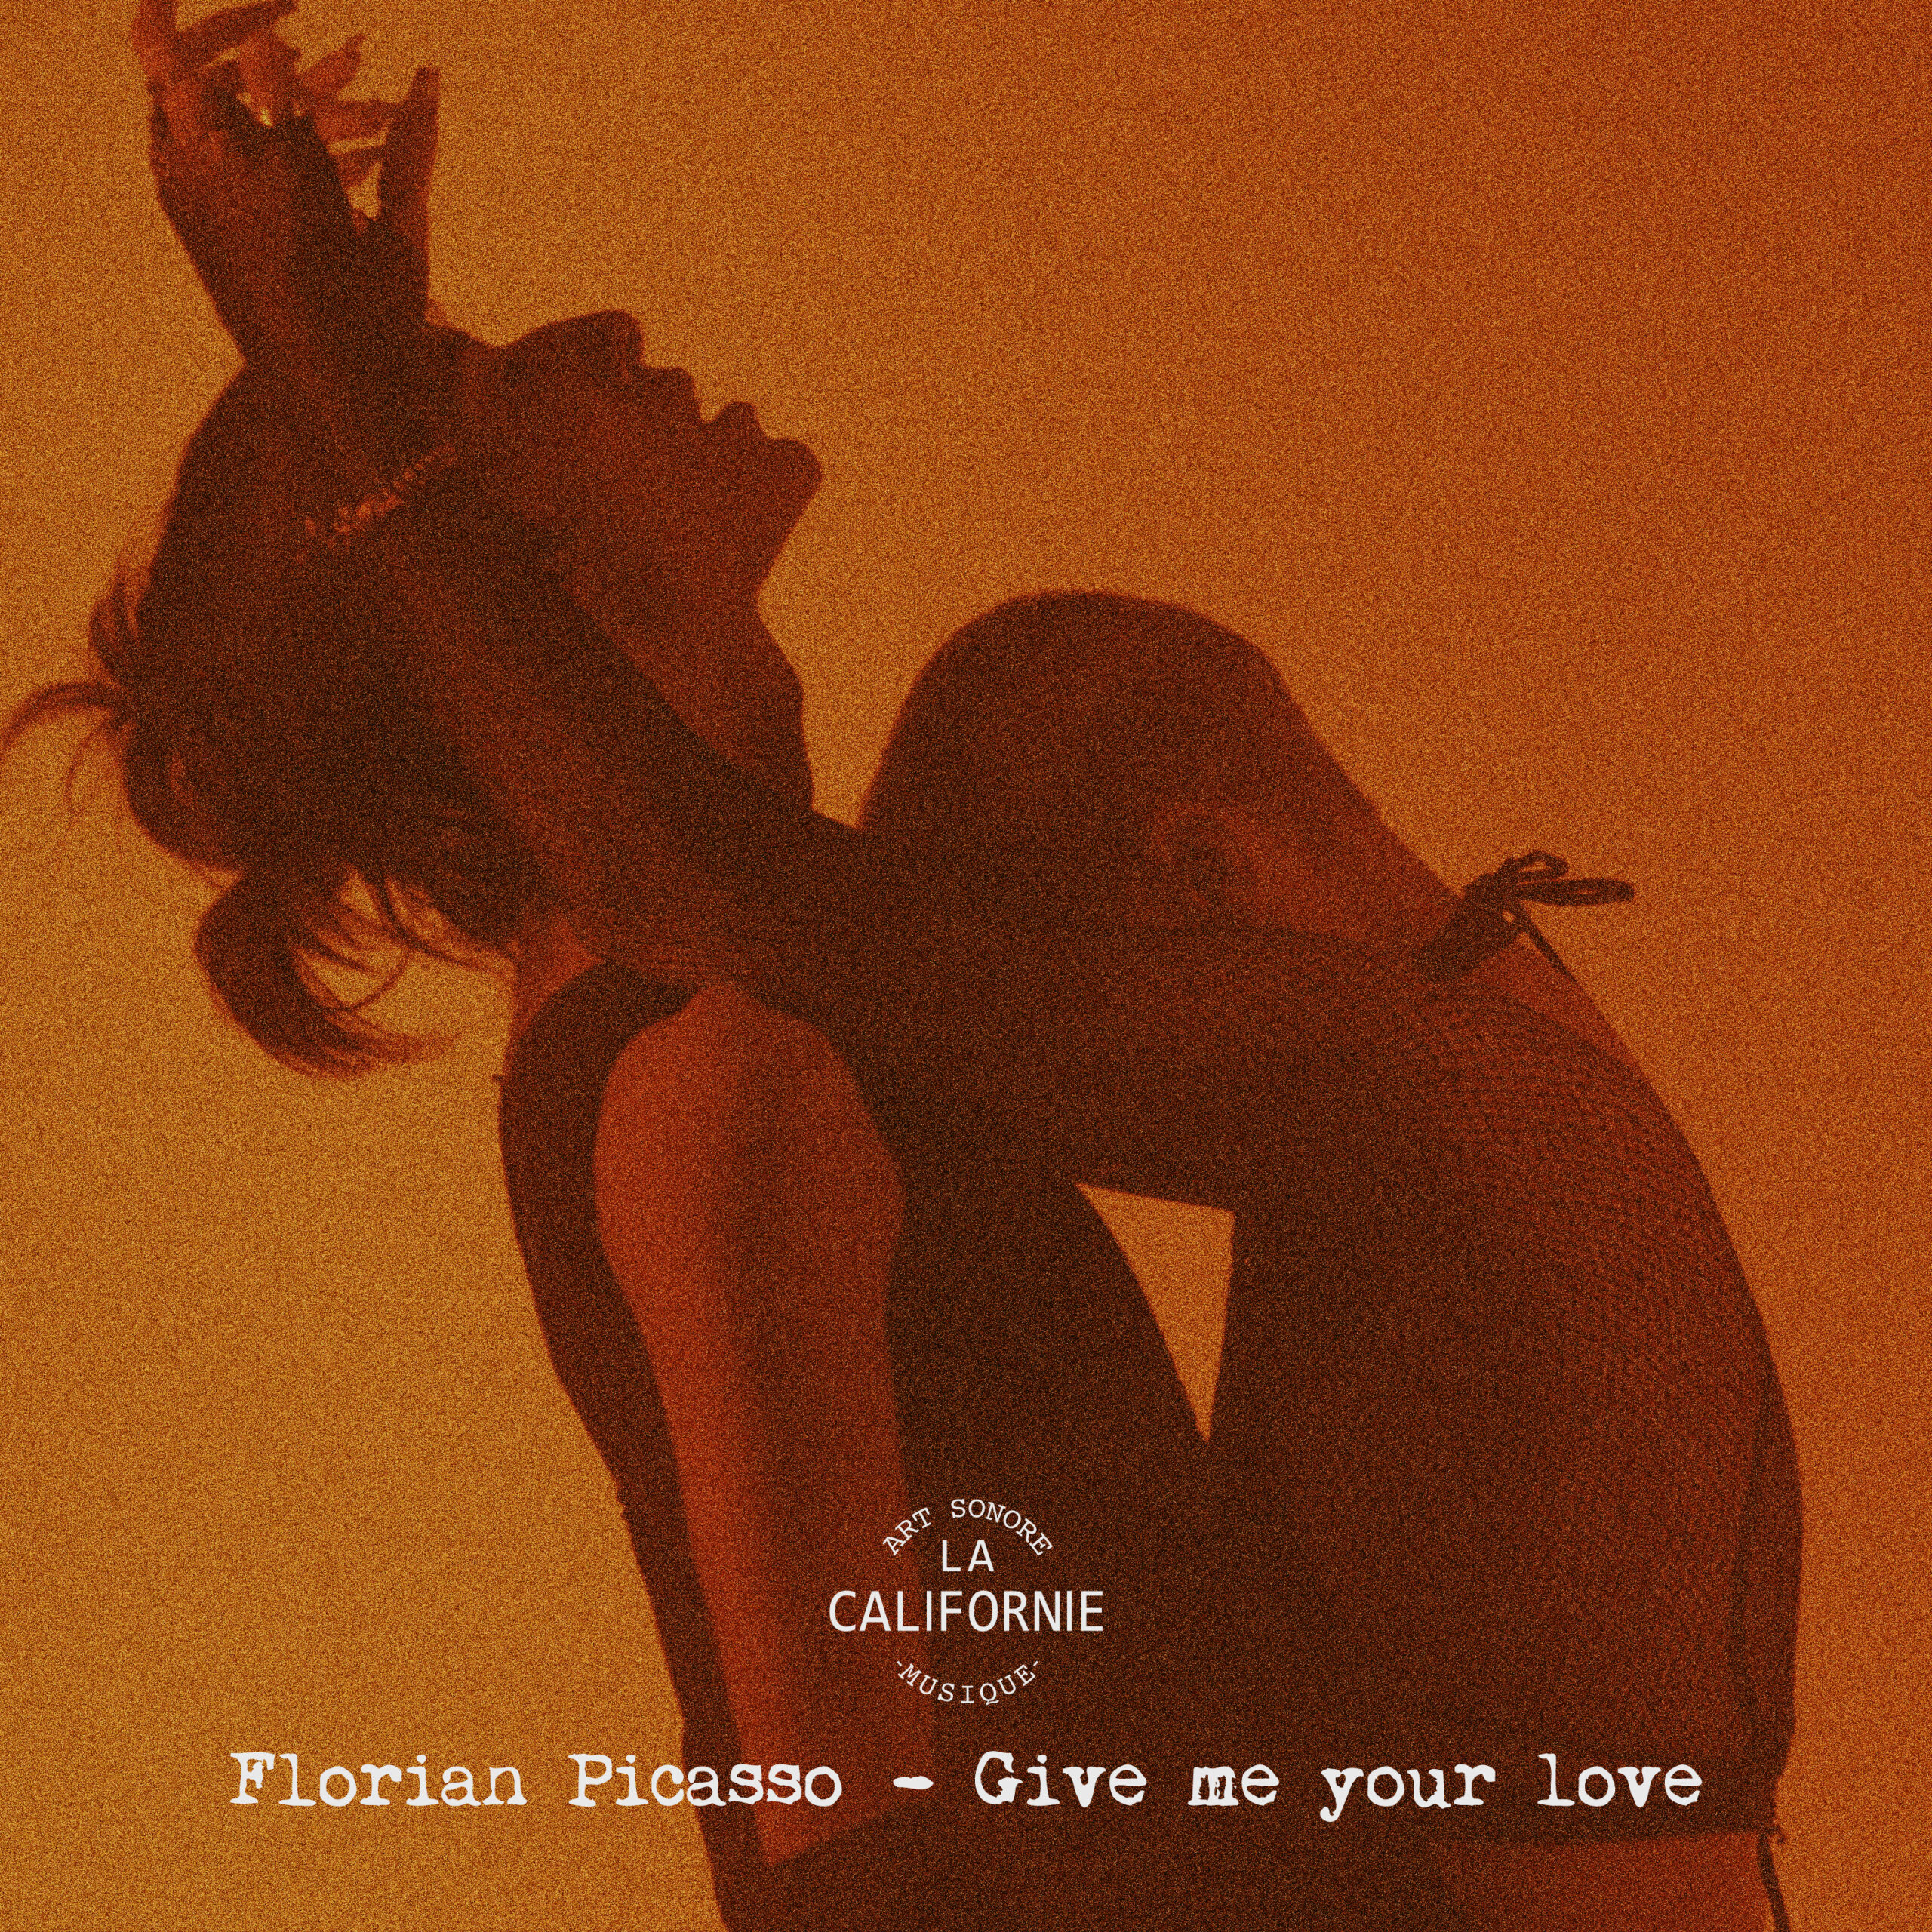 Florian Picasso releases new new single and sound